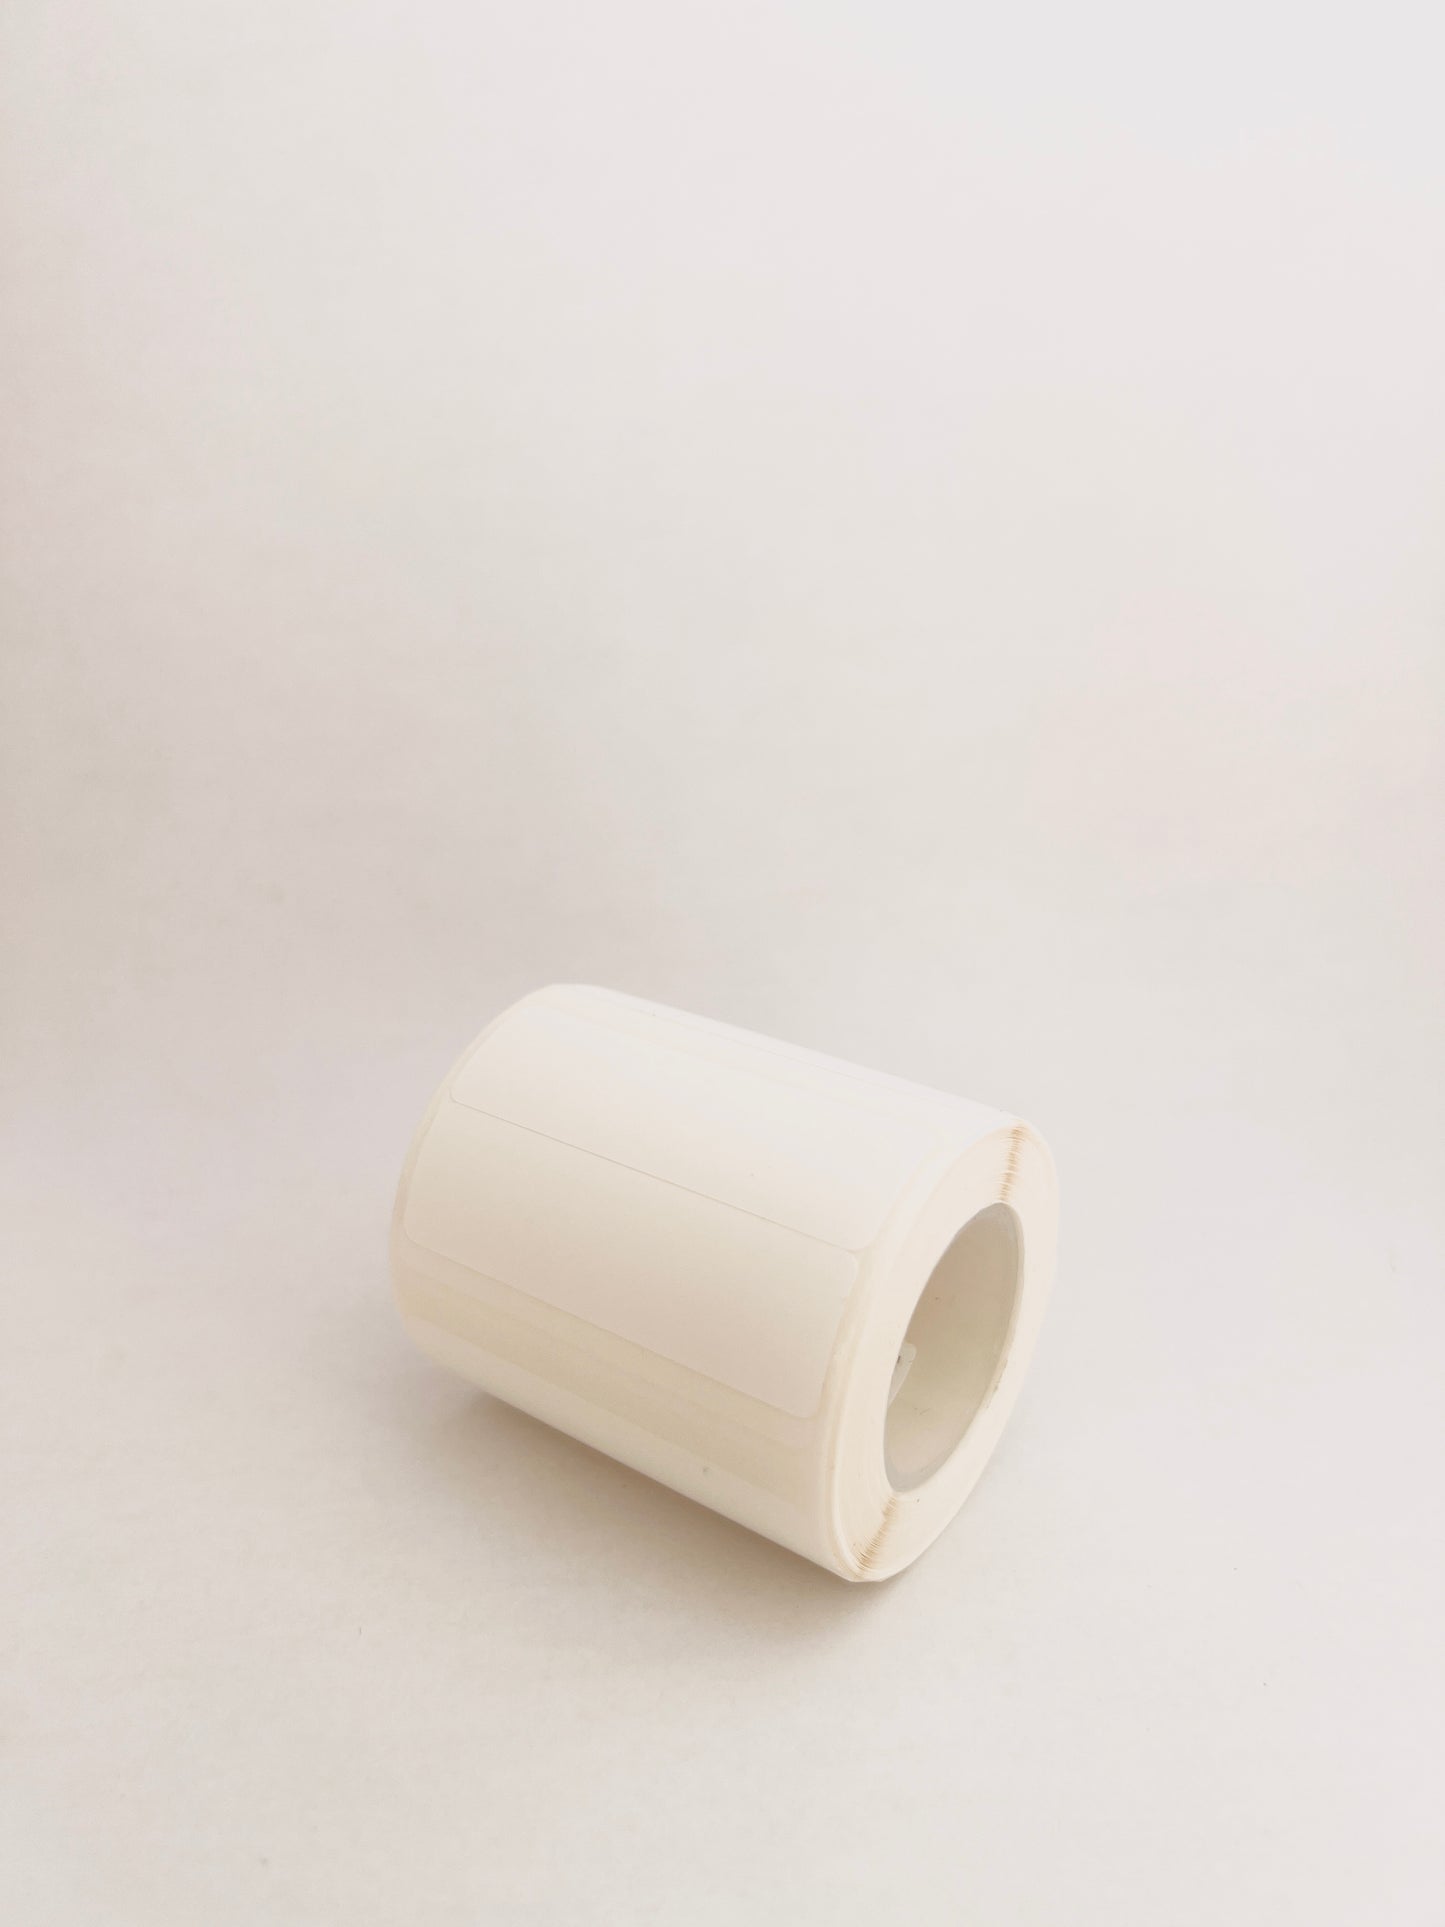 Large White Stationary Labels - 460 per roll 🏷️